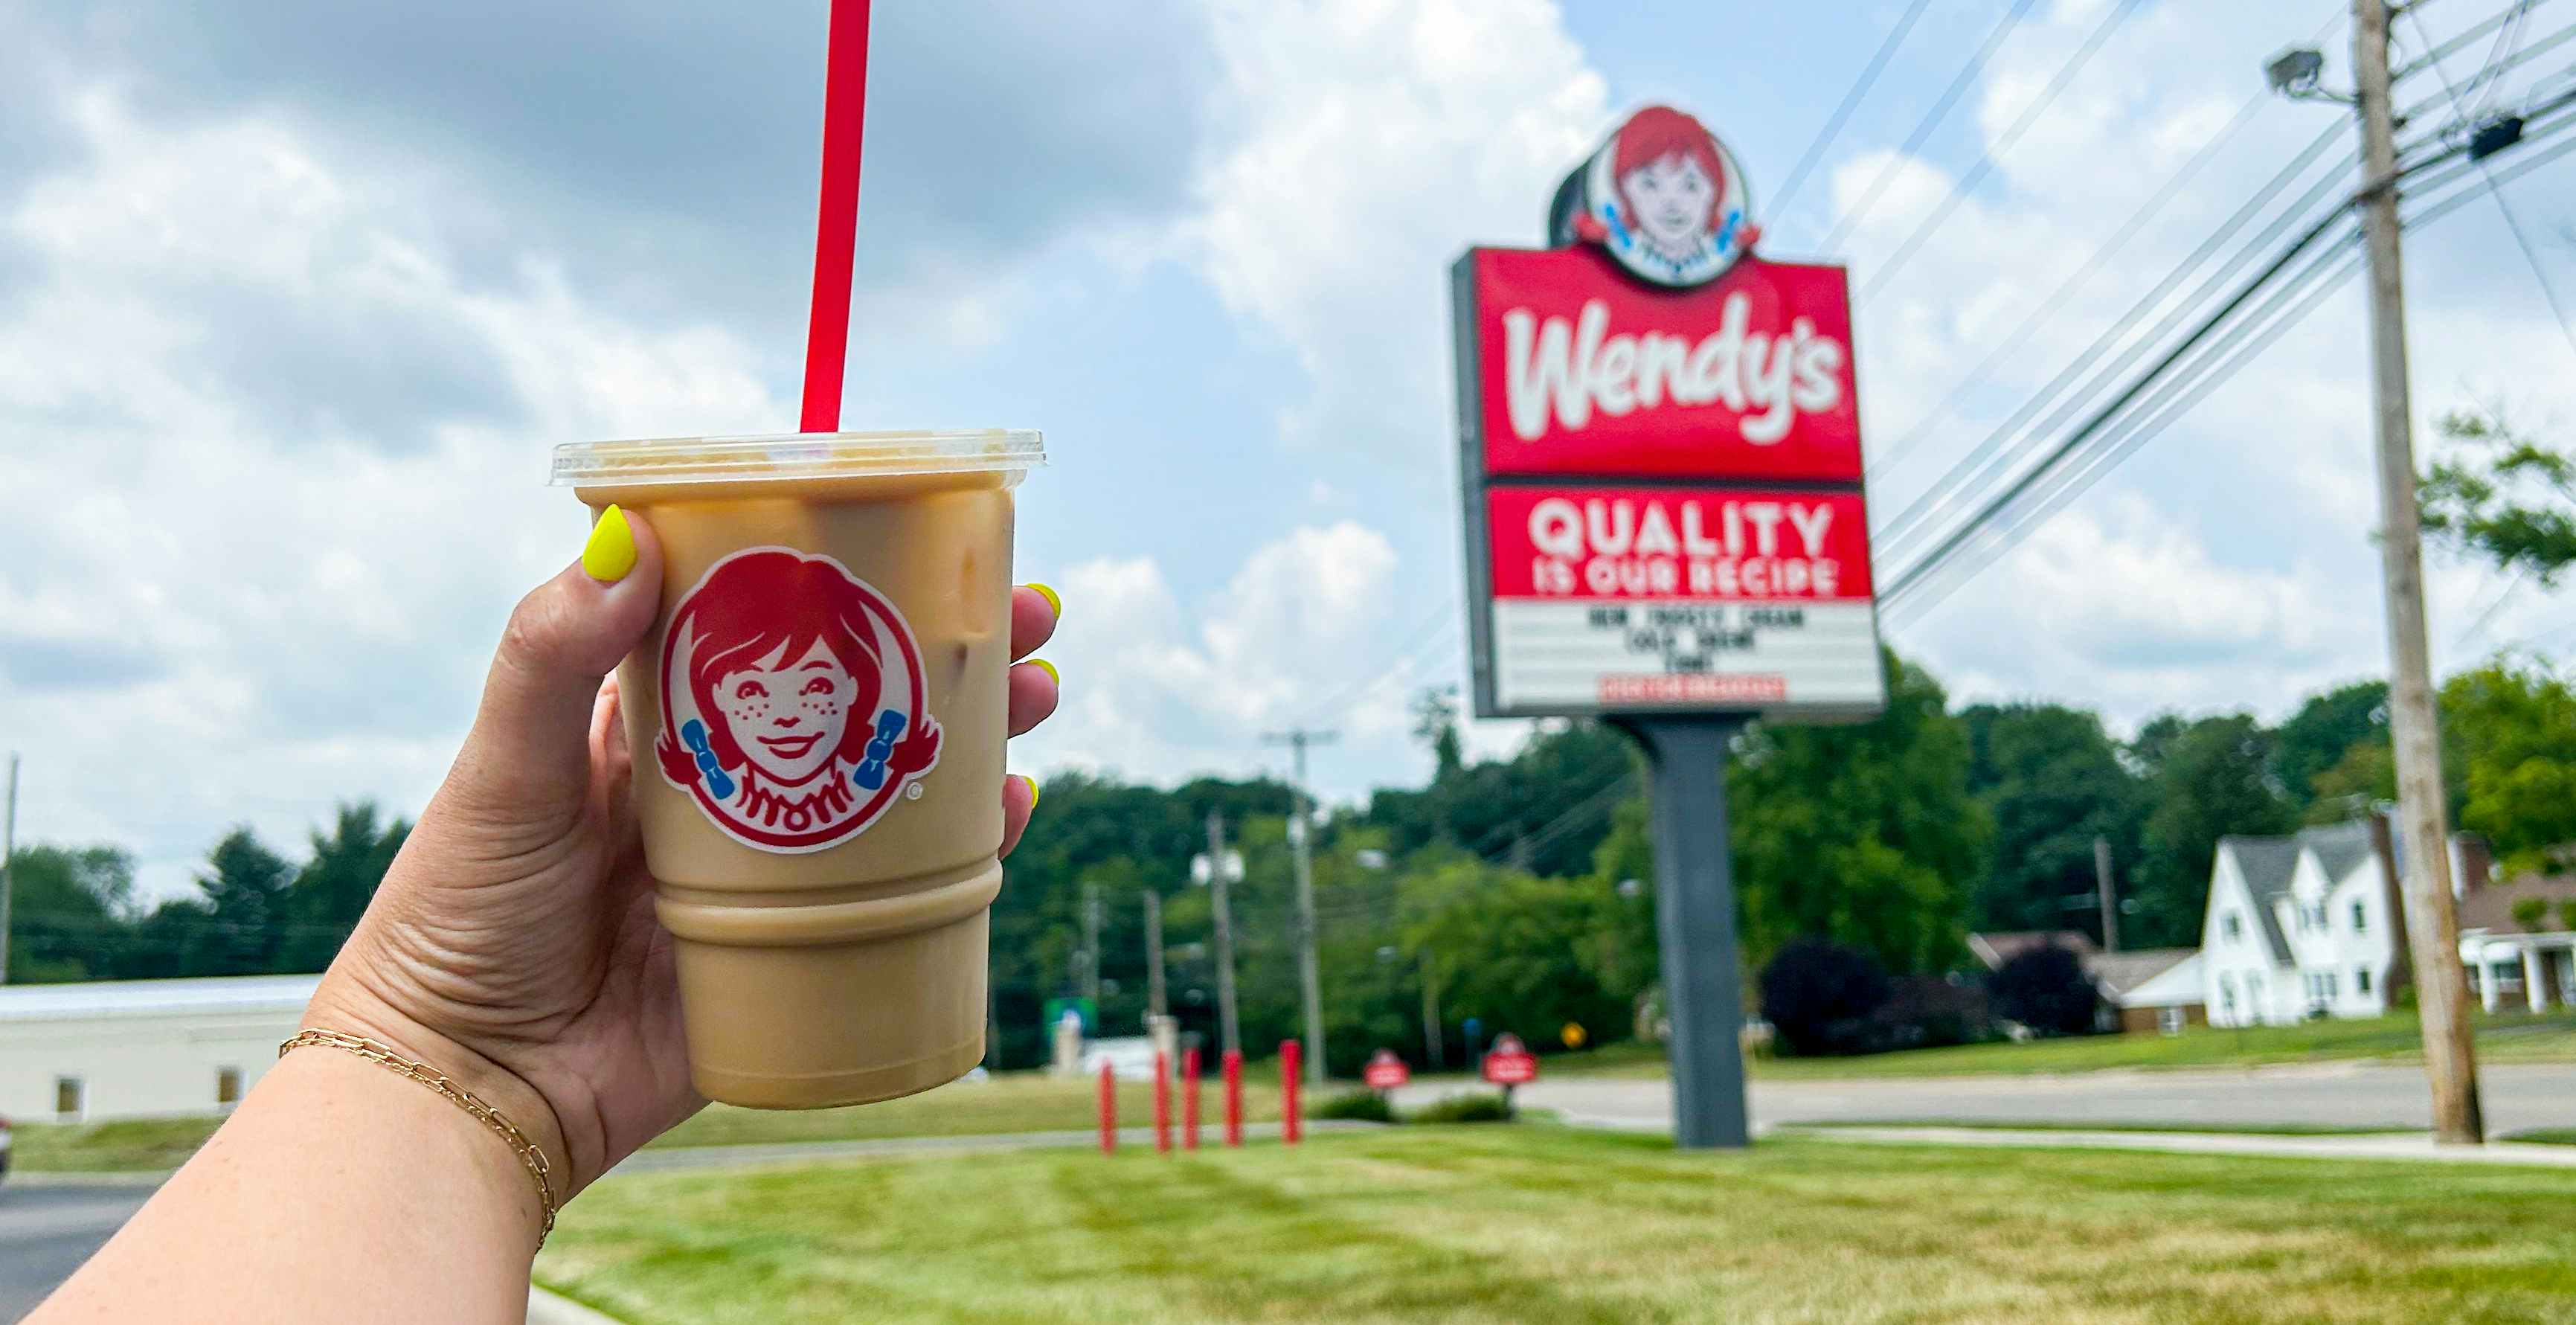 https://prod-cdn-thekrazycouponlady.imgix.net/wp-content/uploads/2023/04/frosty-cream-cold-brew-hand-wendys-sign-kcl-feature-1690307579-1690307579.jpg?auto=format&fit=fill&q=25